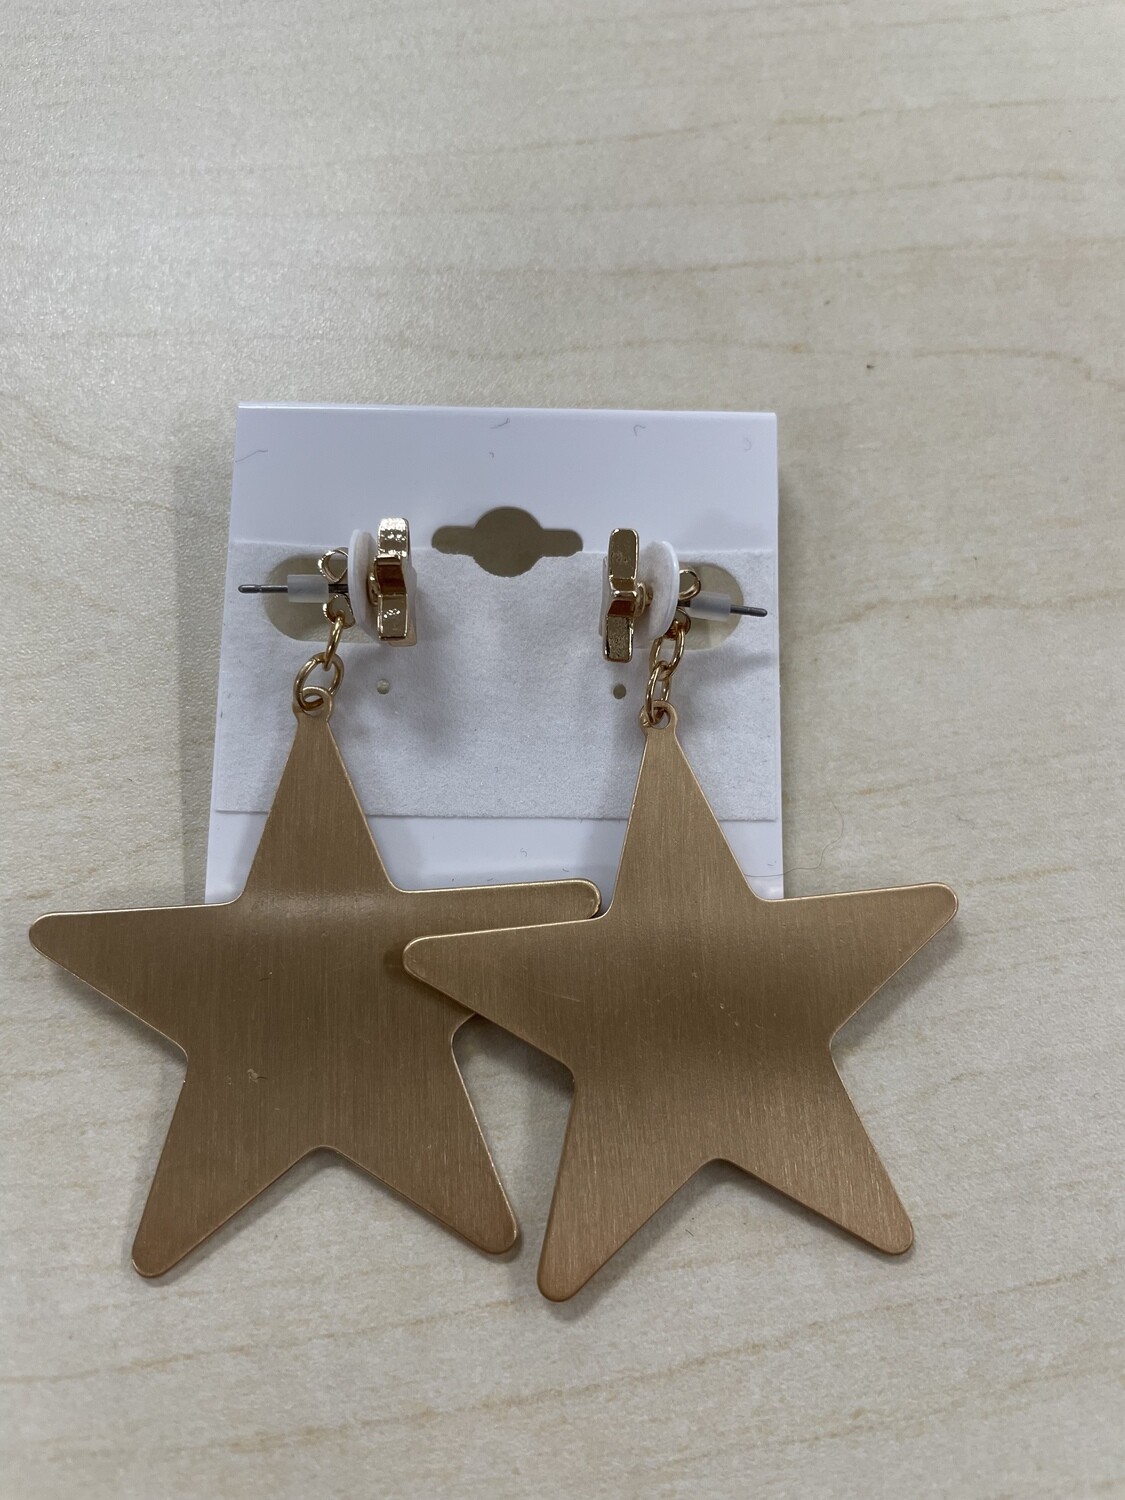 Star Stud with Large Star Dangle Earrings